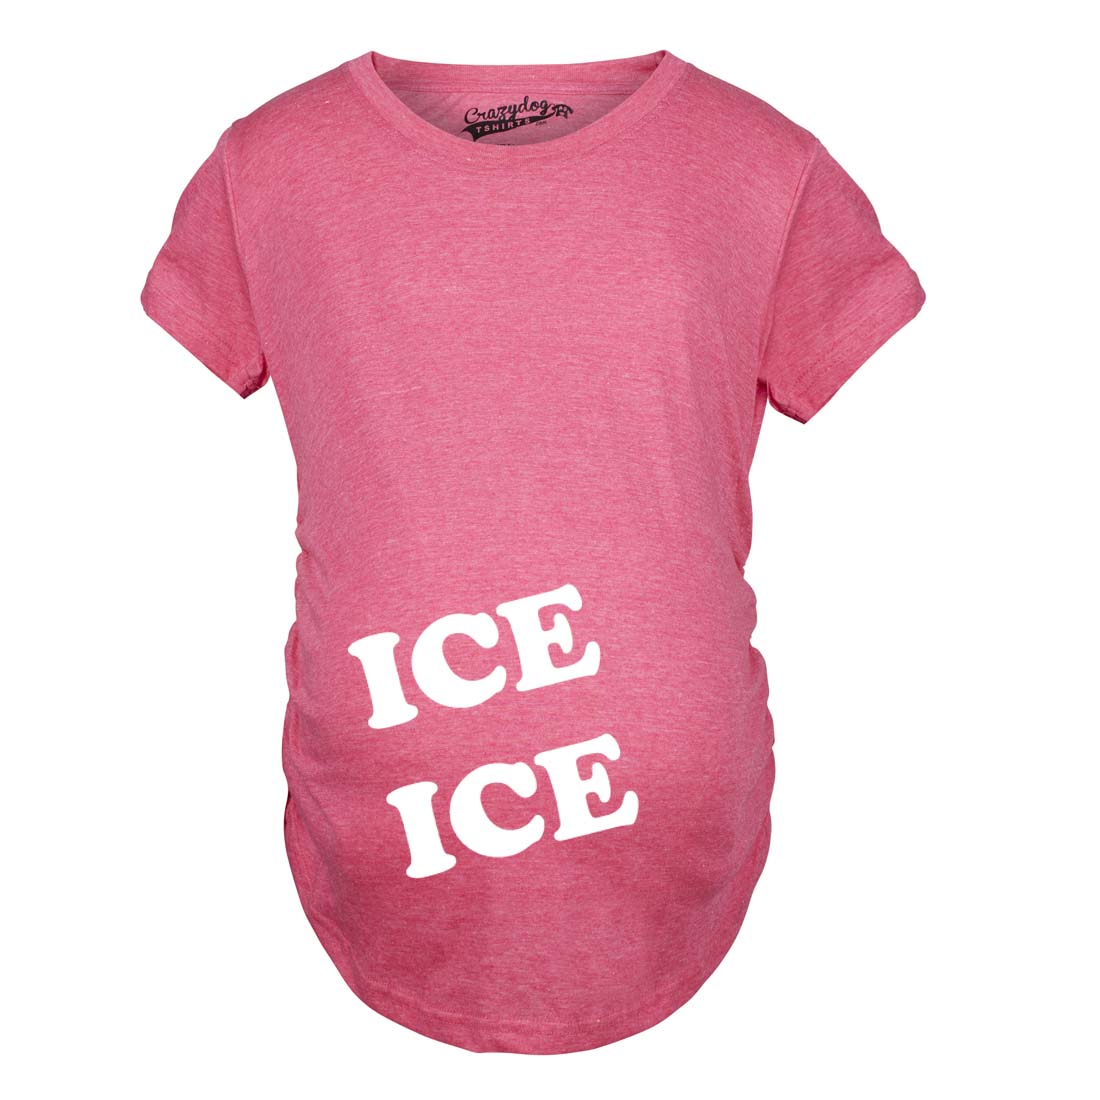 Funny Pink Ice Ice Baby Maternity T Shirt Nerdy Music Tee